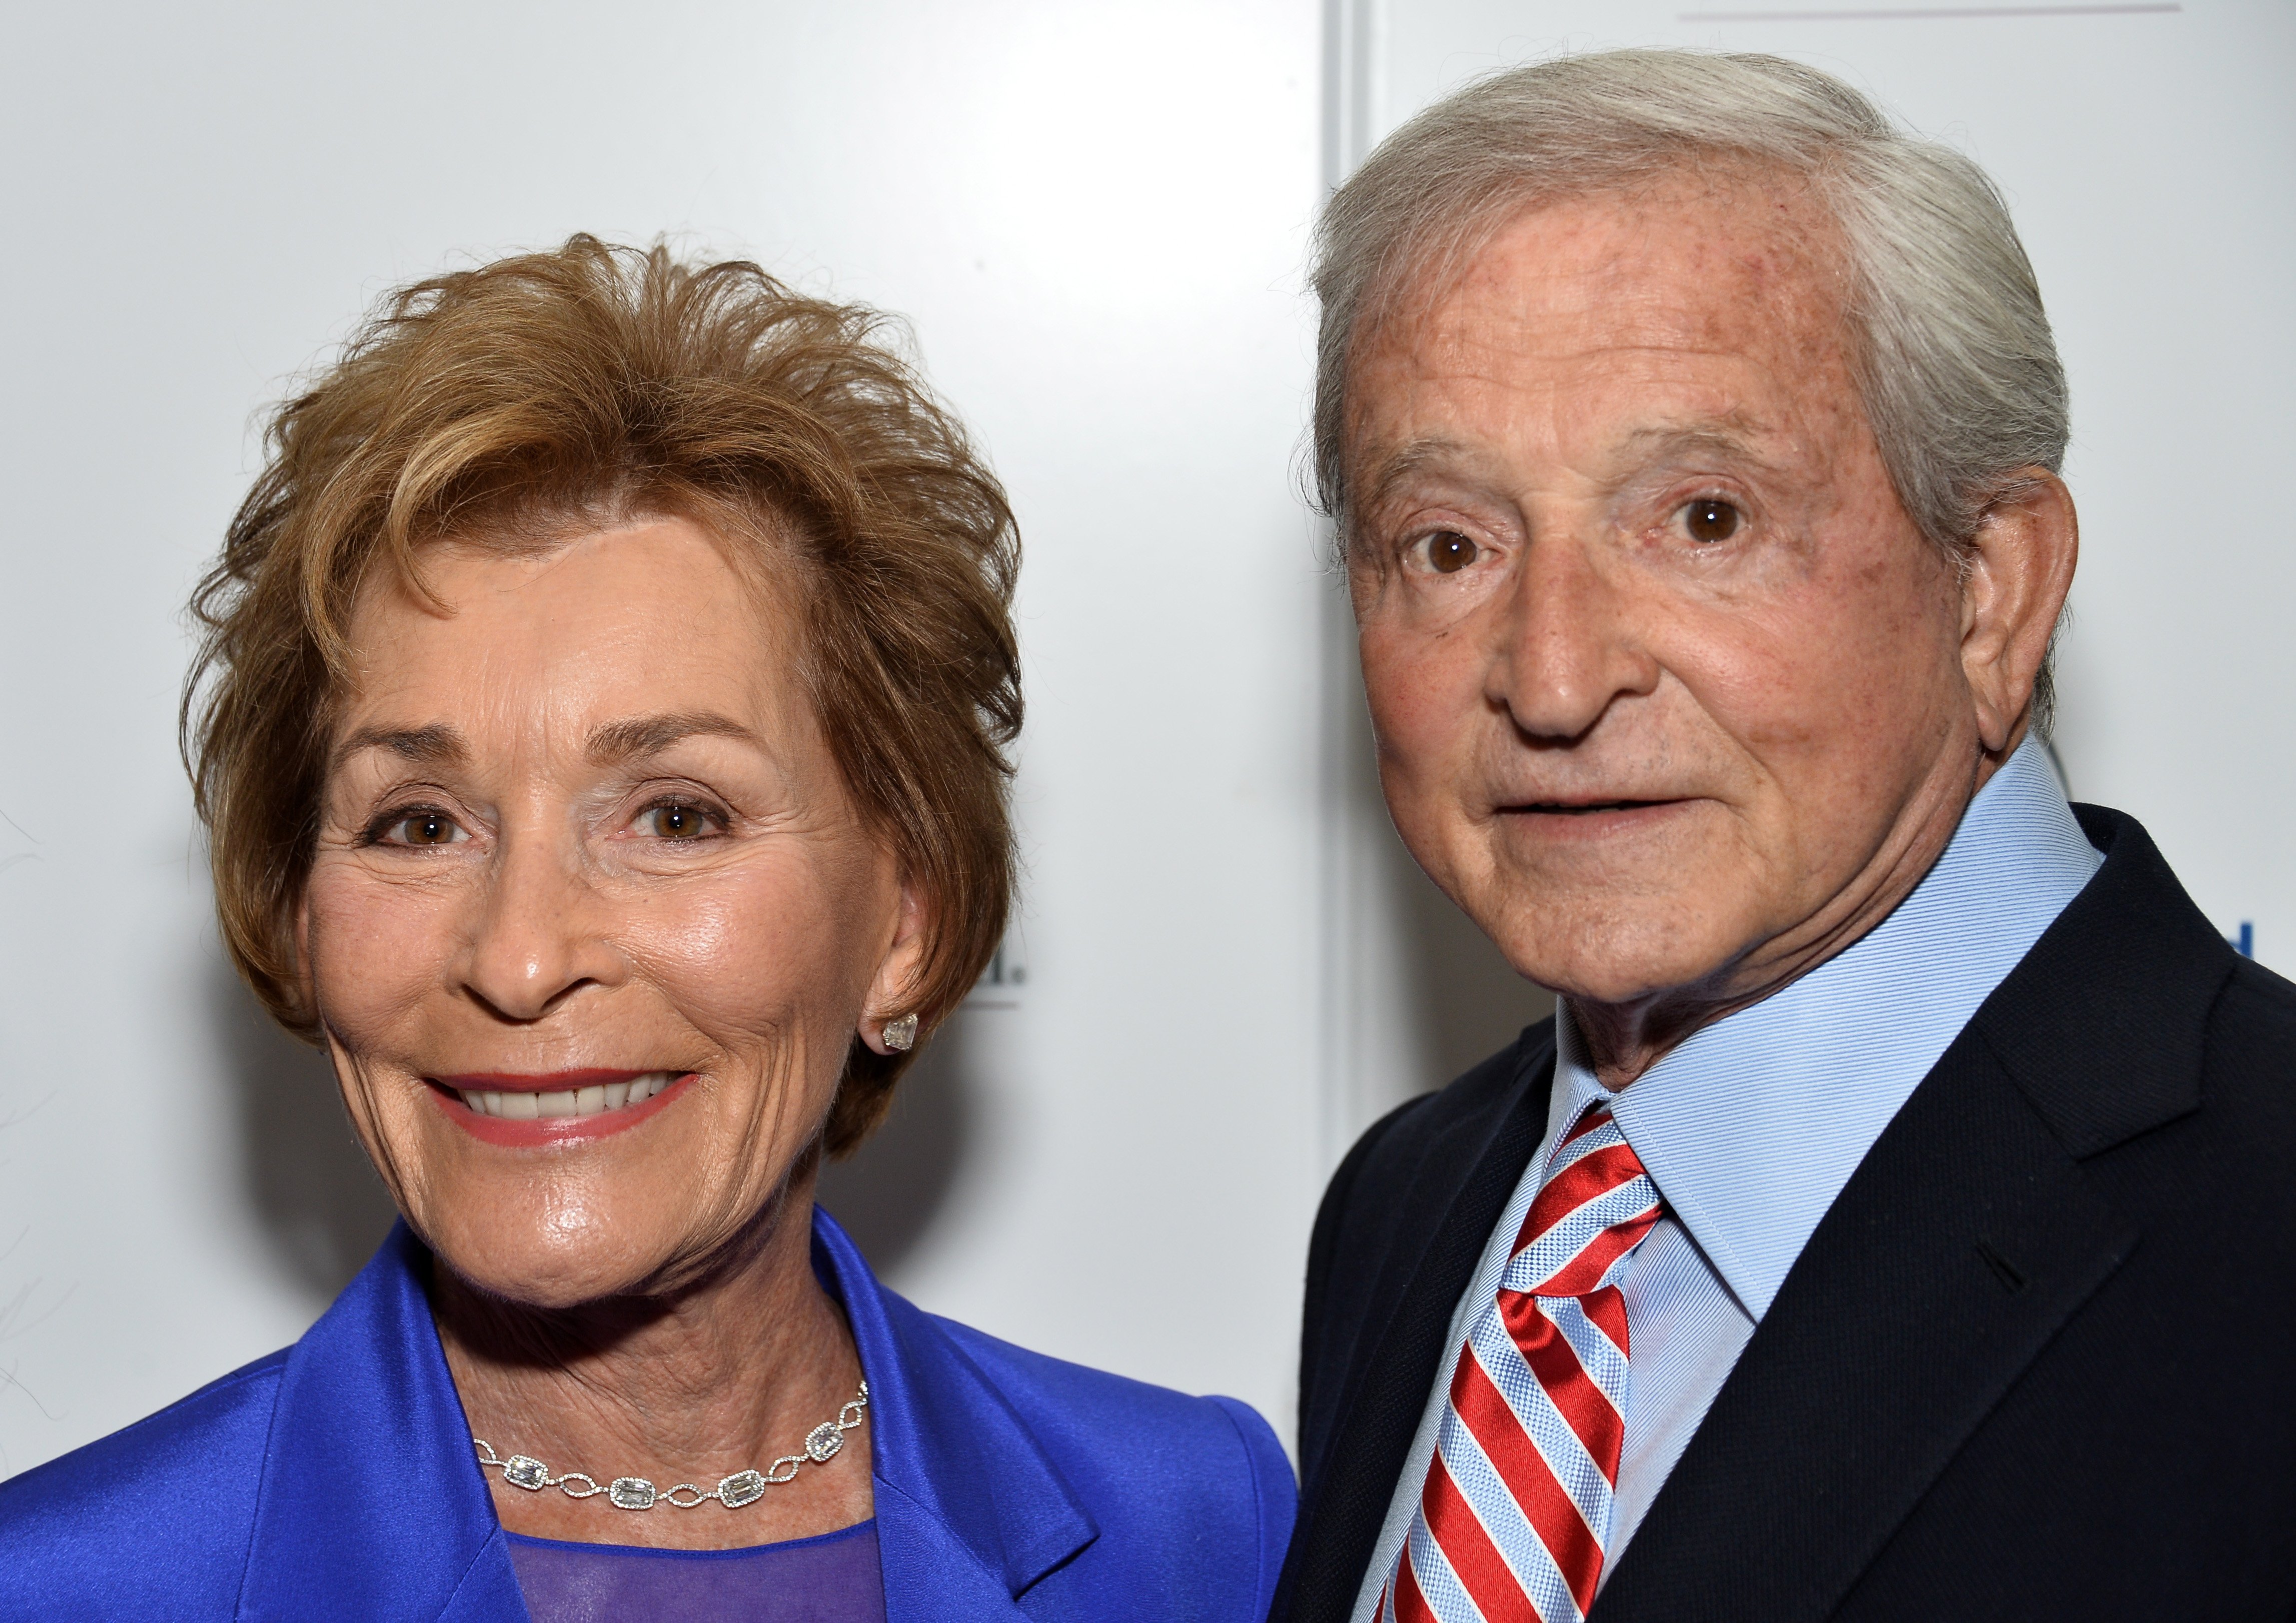 The Honorable Judy Sheindlin and her husband Jerry Sheindlin at the Regent Beverly Wilshire Hotel on April 13, 2015 in Beverly Hills, California. | Source: Getty Images